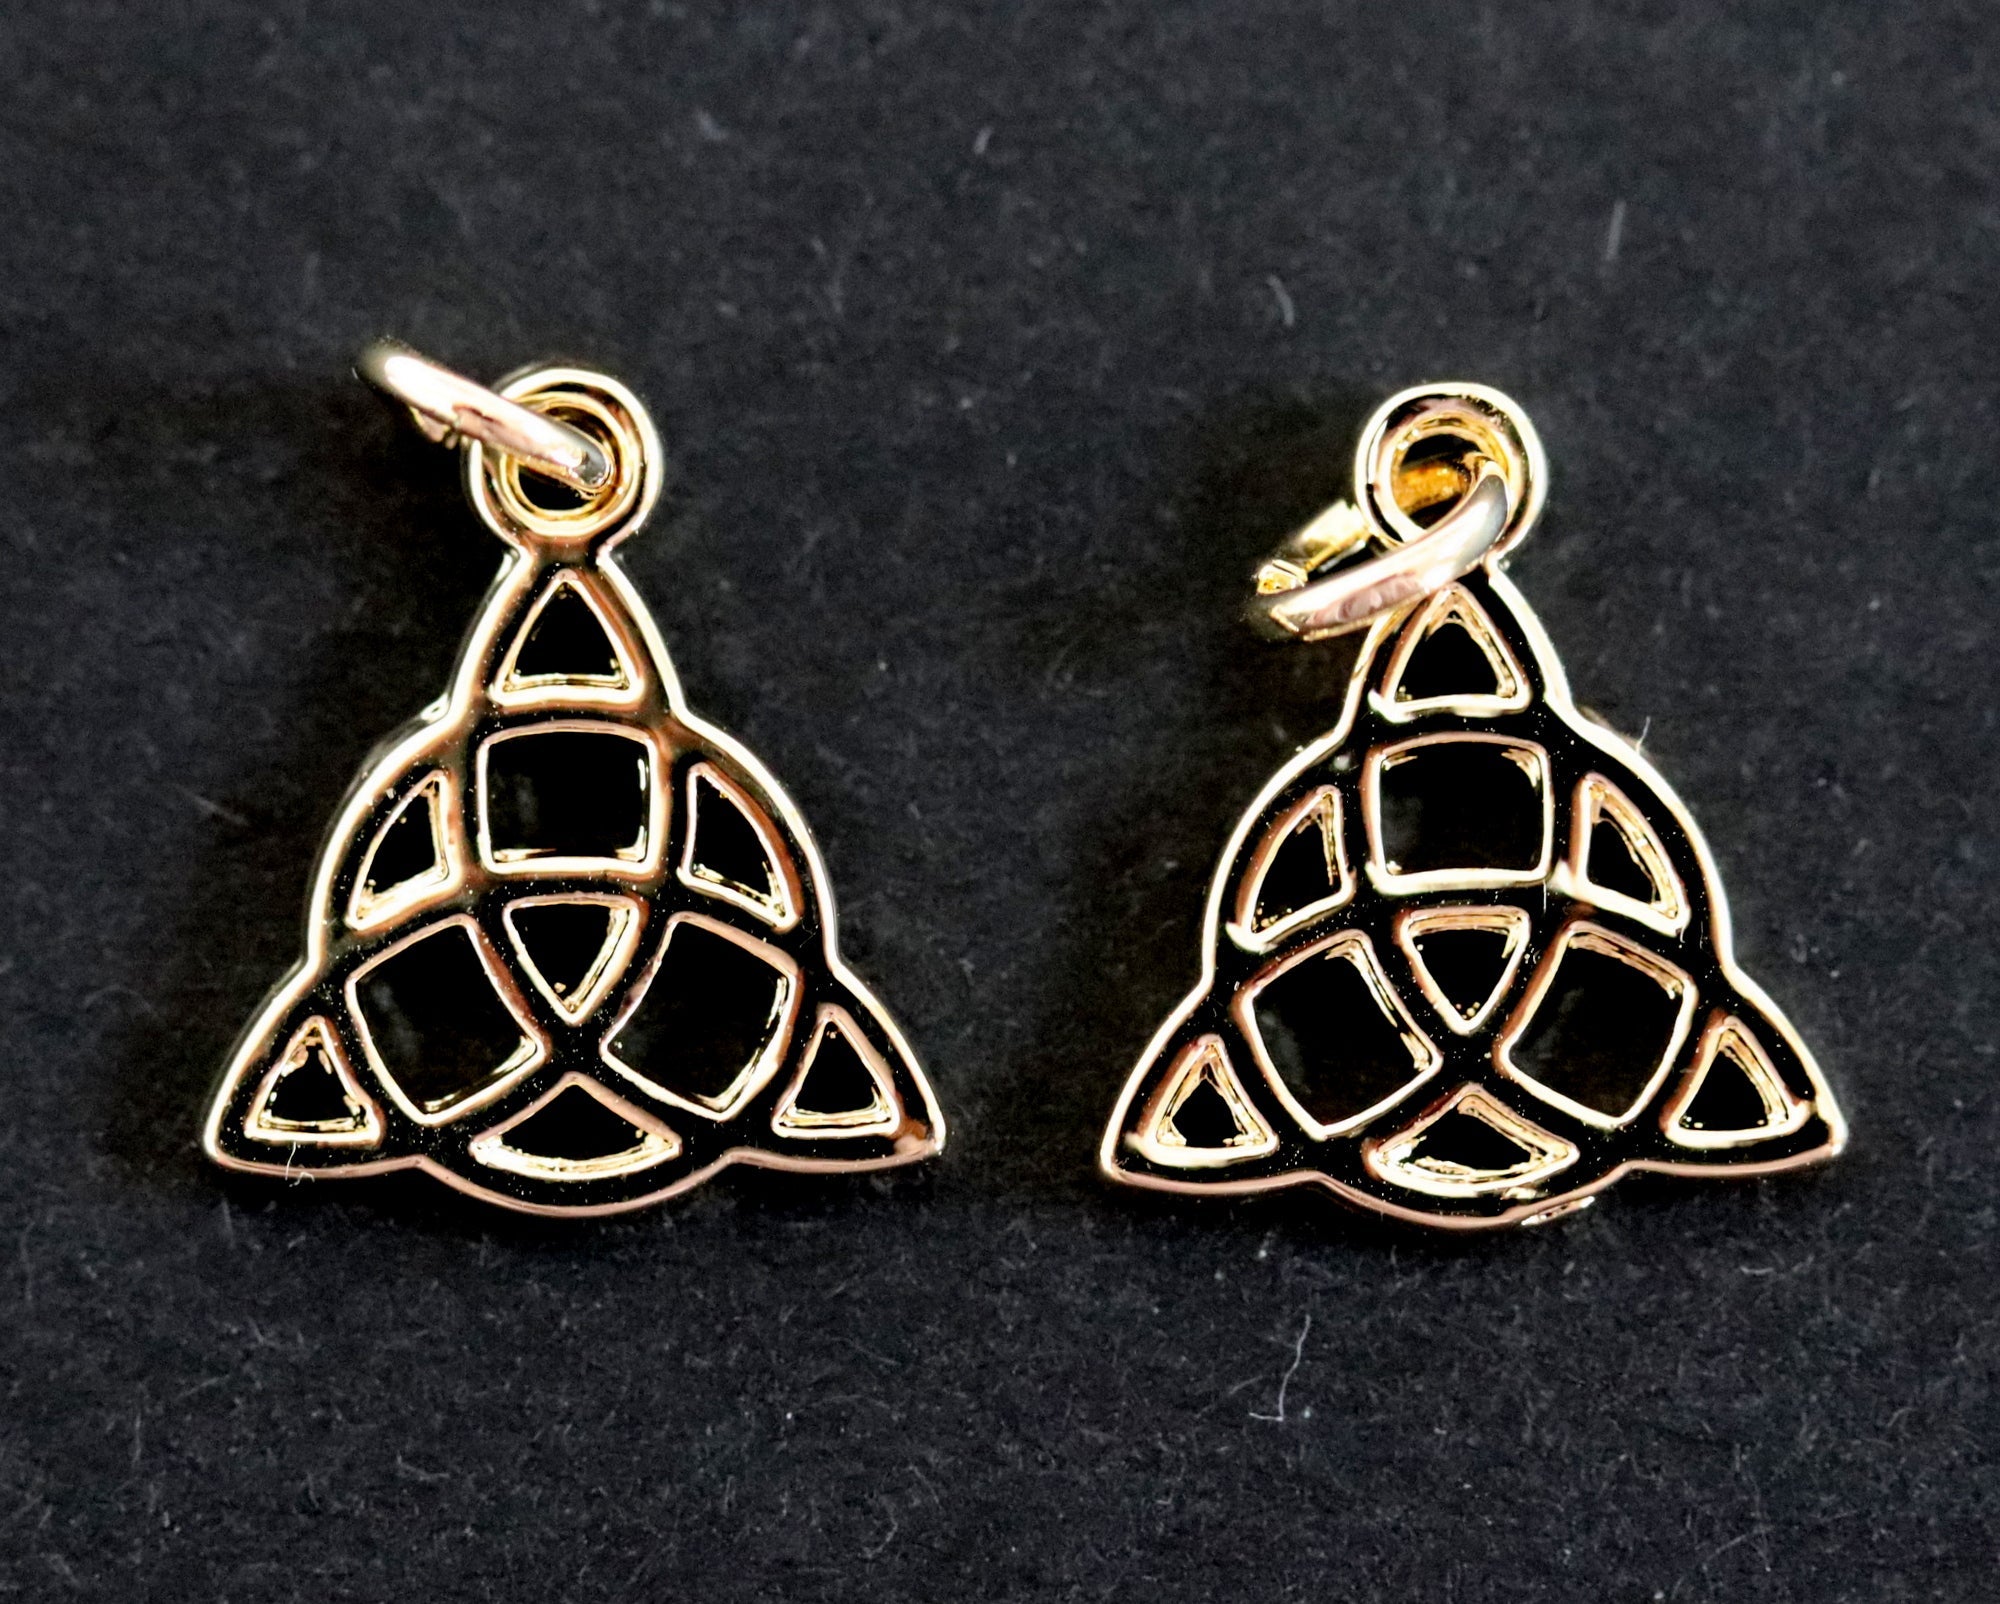 Celtic Trinity Knot charm 16x14mm 14K Gold plated metal alloy pendant